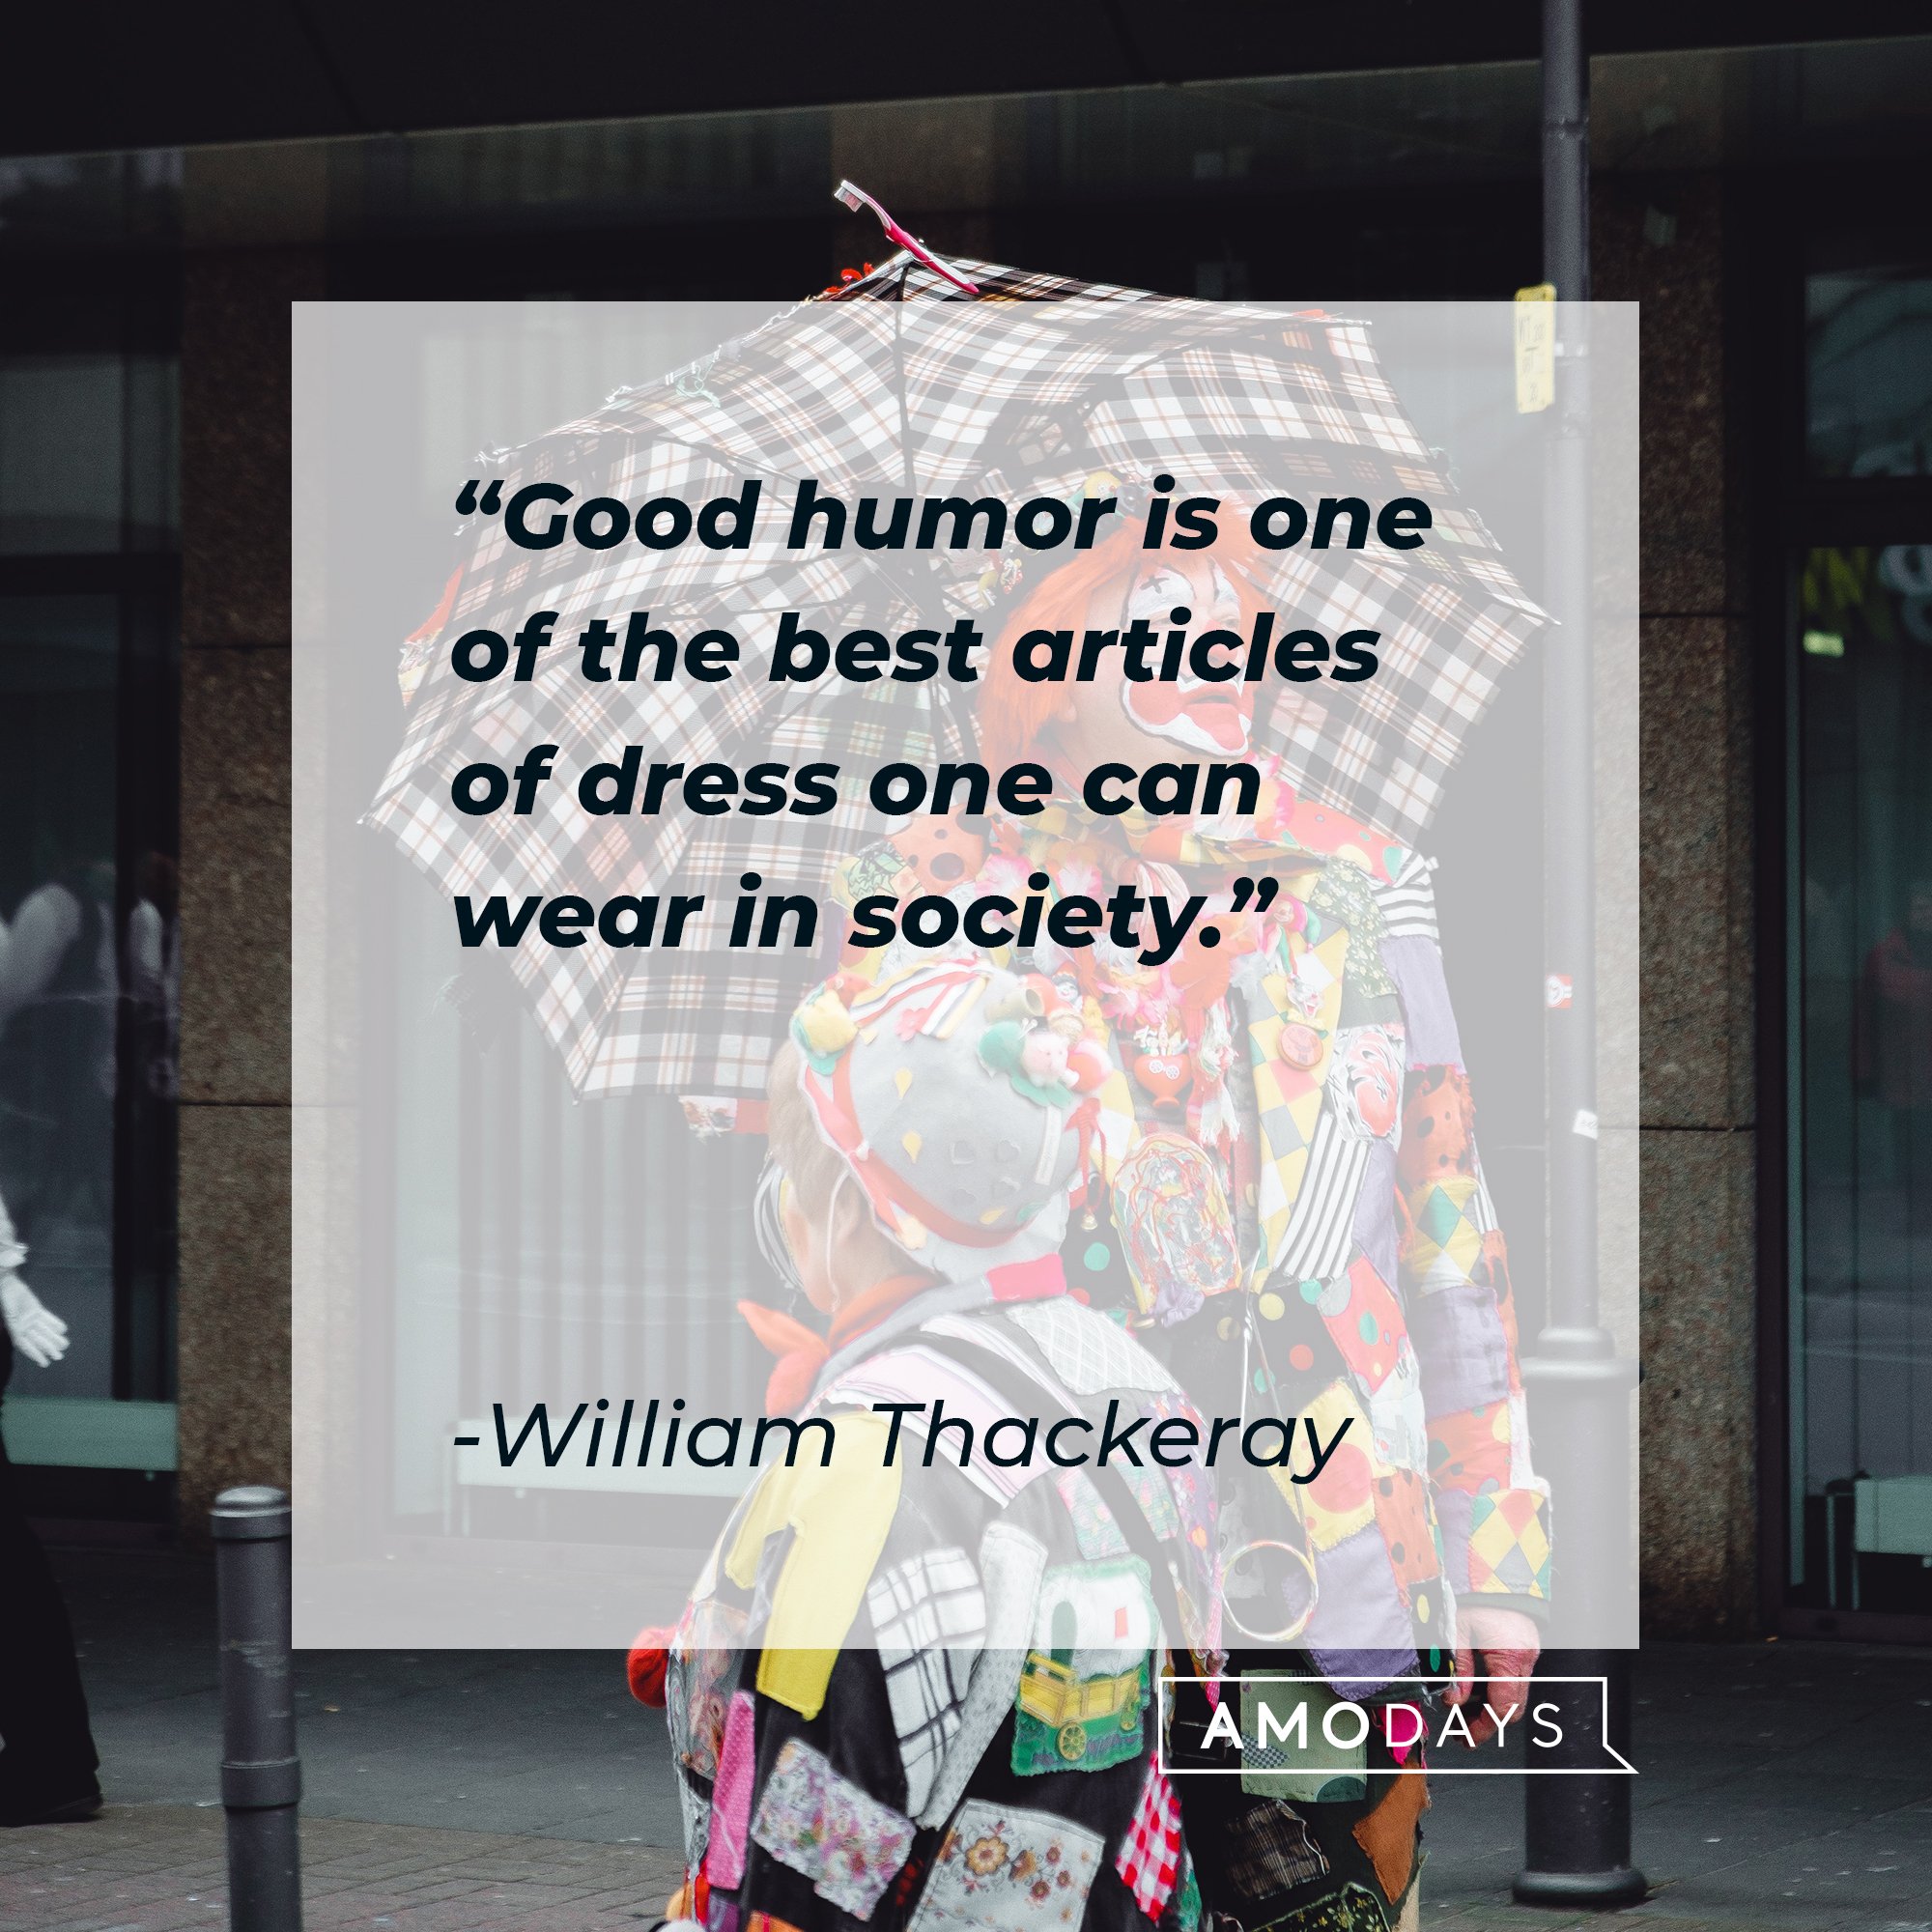 William Thackeray's quote "Good humor is one of the best articles of dress one can wear in society." | Source: Unsplash.com